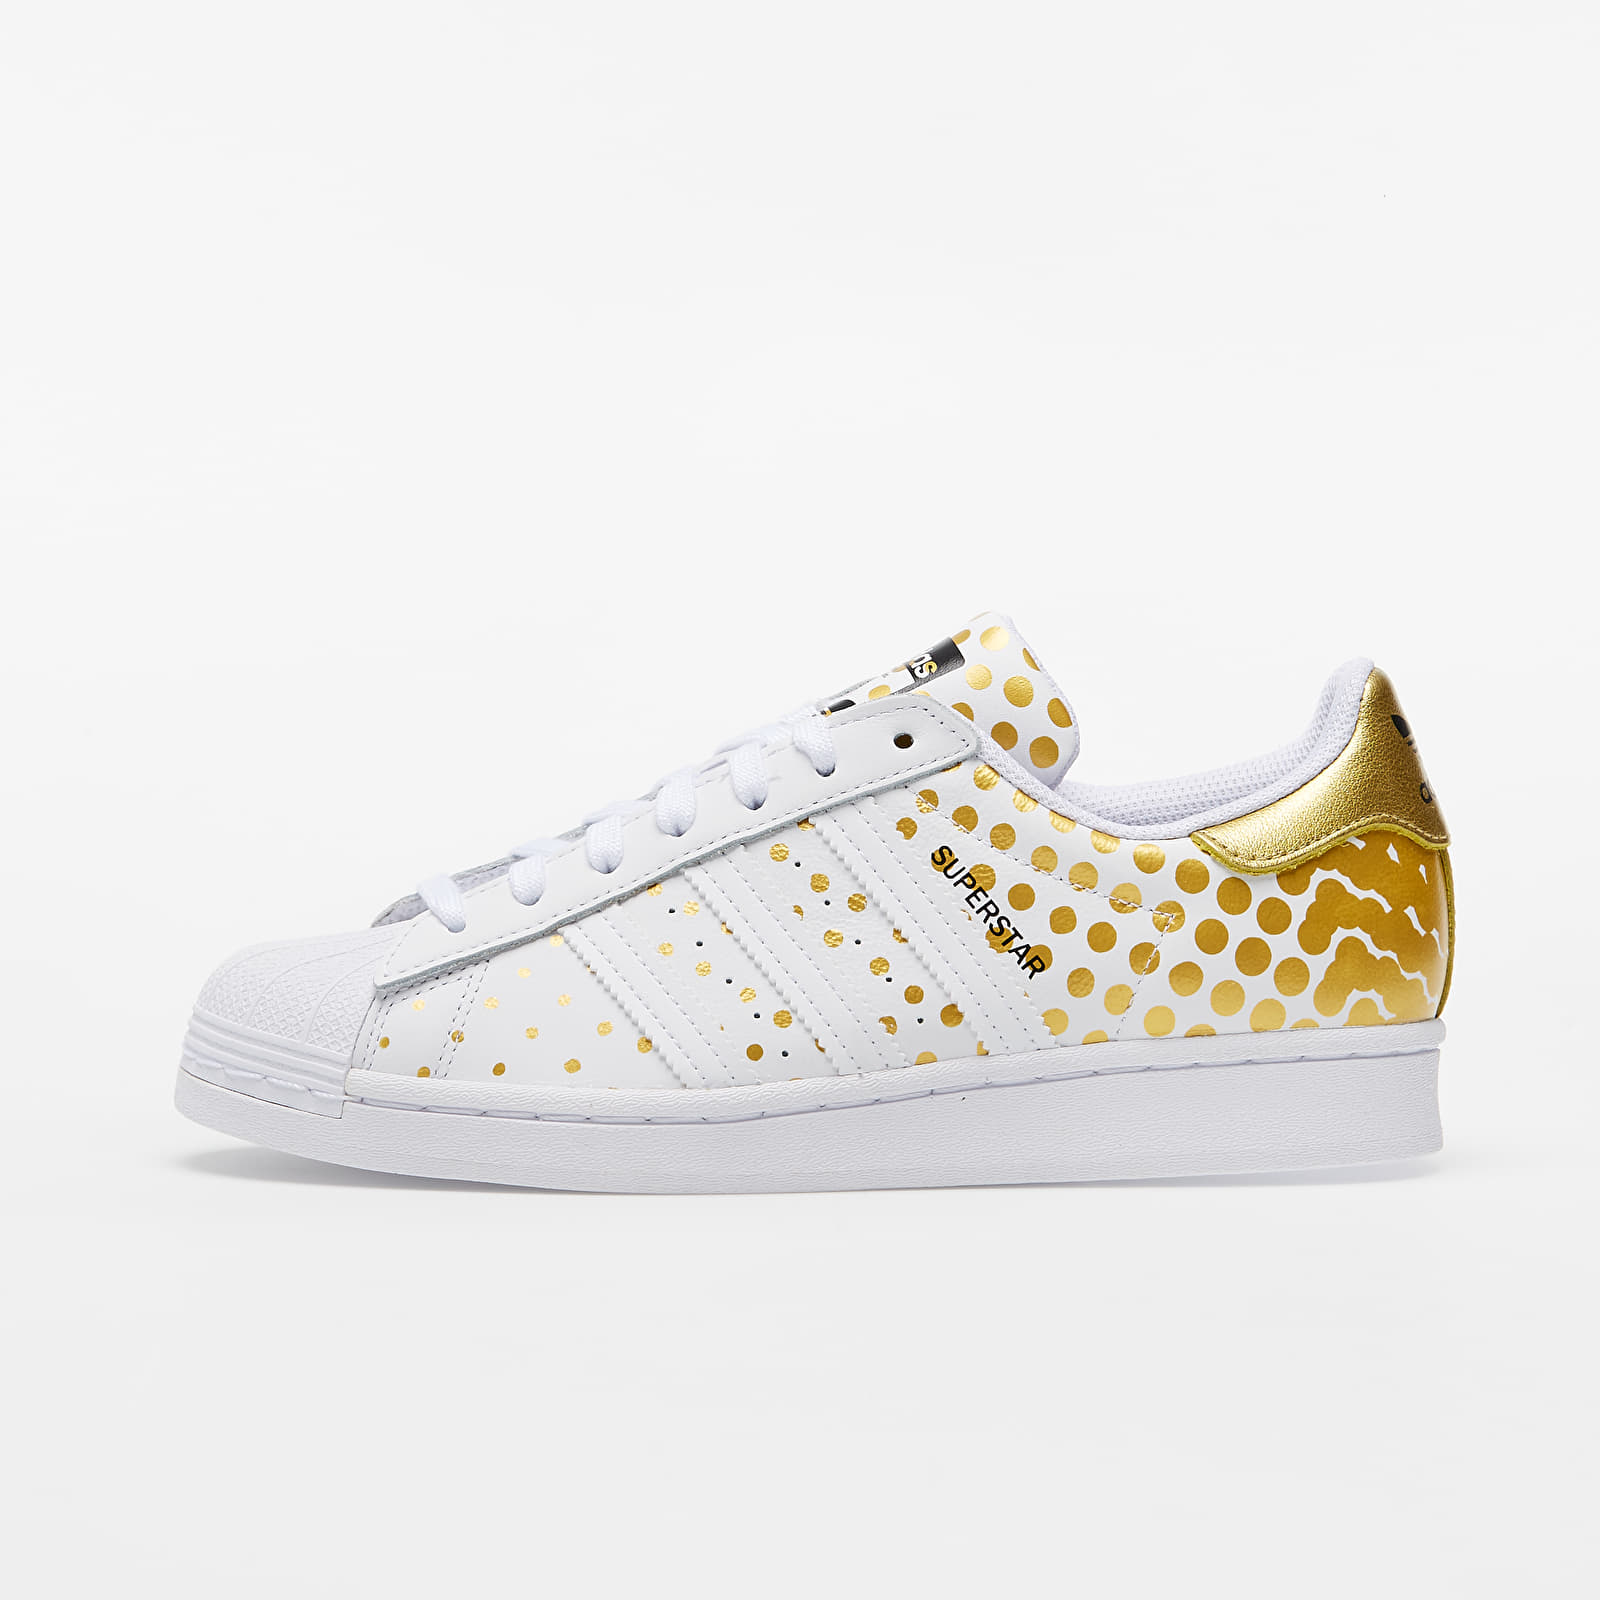 Women's shoes adidas Superstar W Gold Metalic/ Ftw White/ Core Black